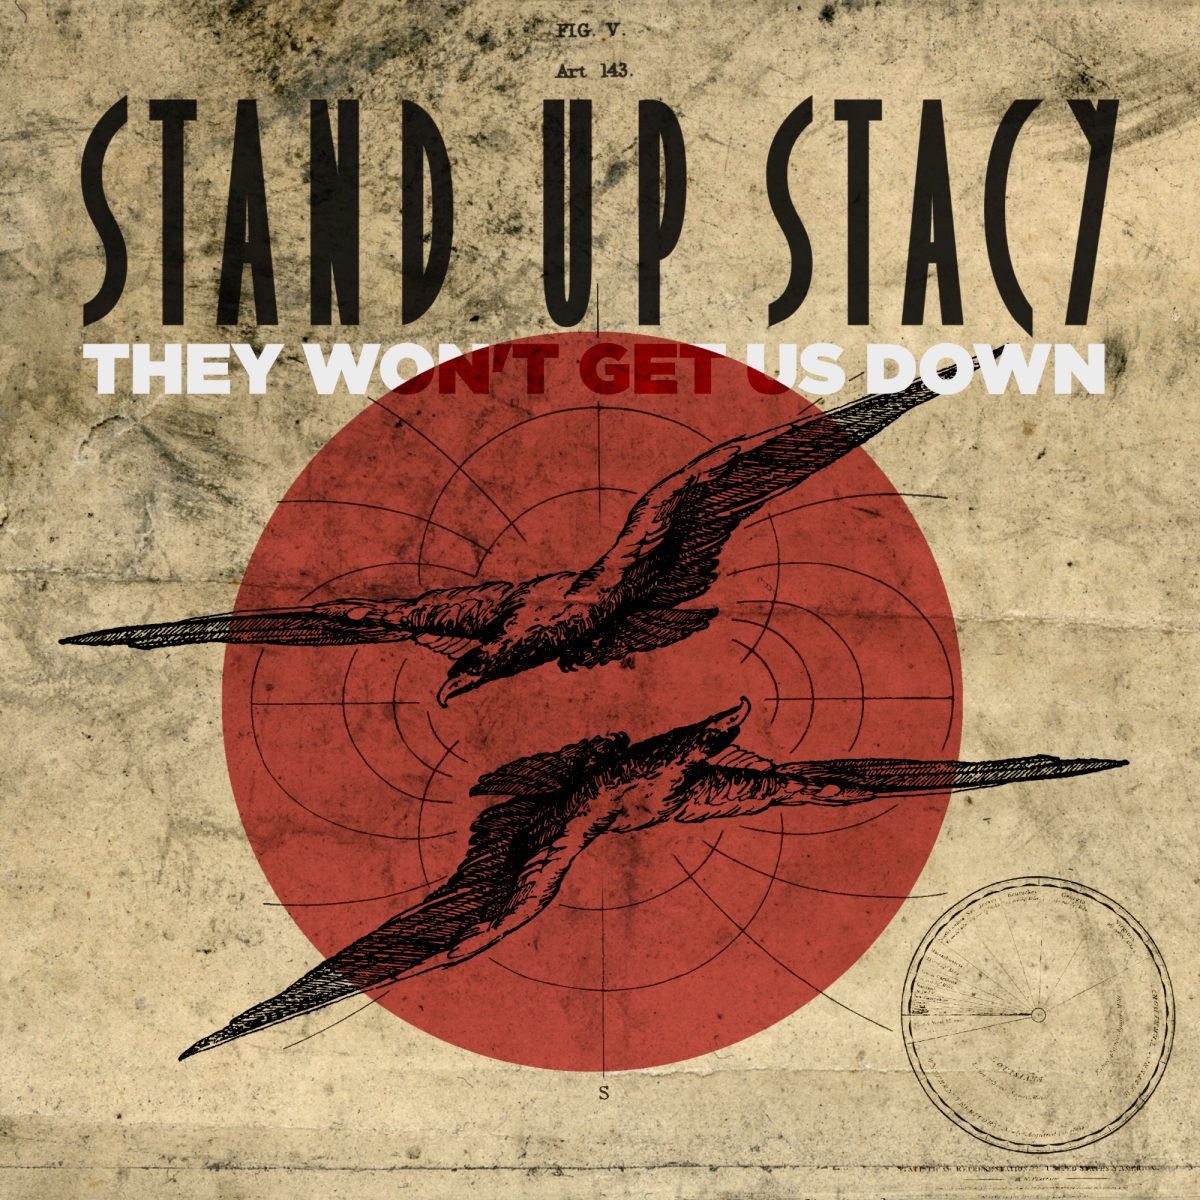 stand-up-stacy-they-wont-get-us-down-single-review